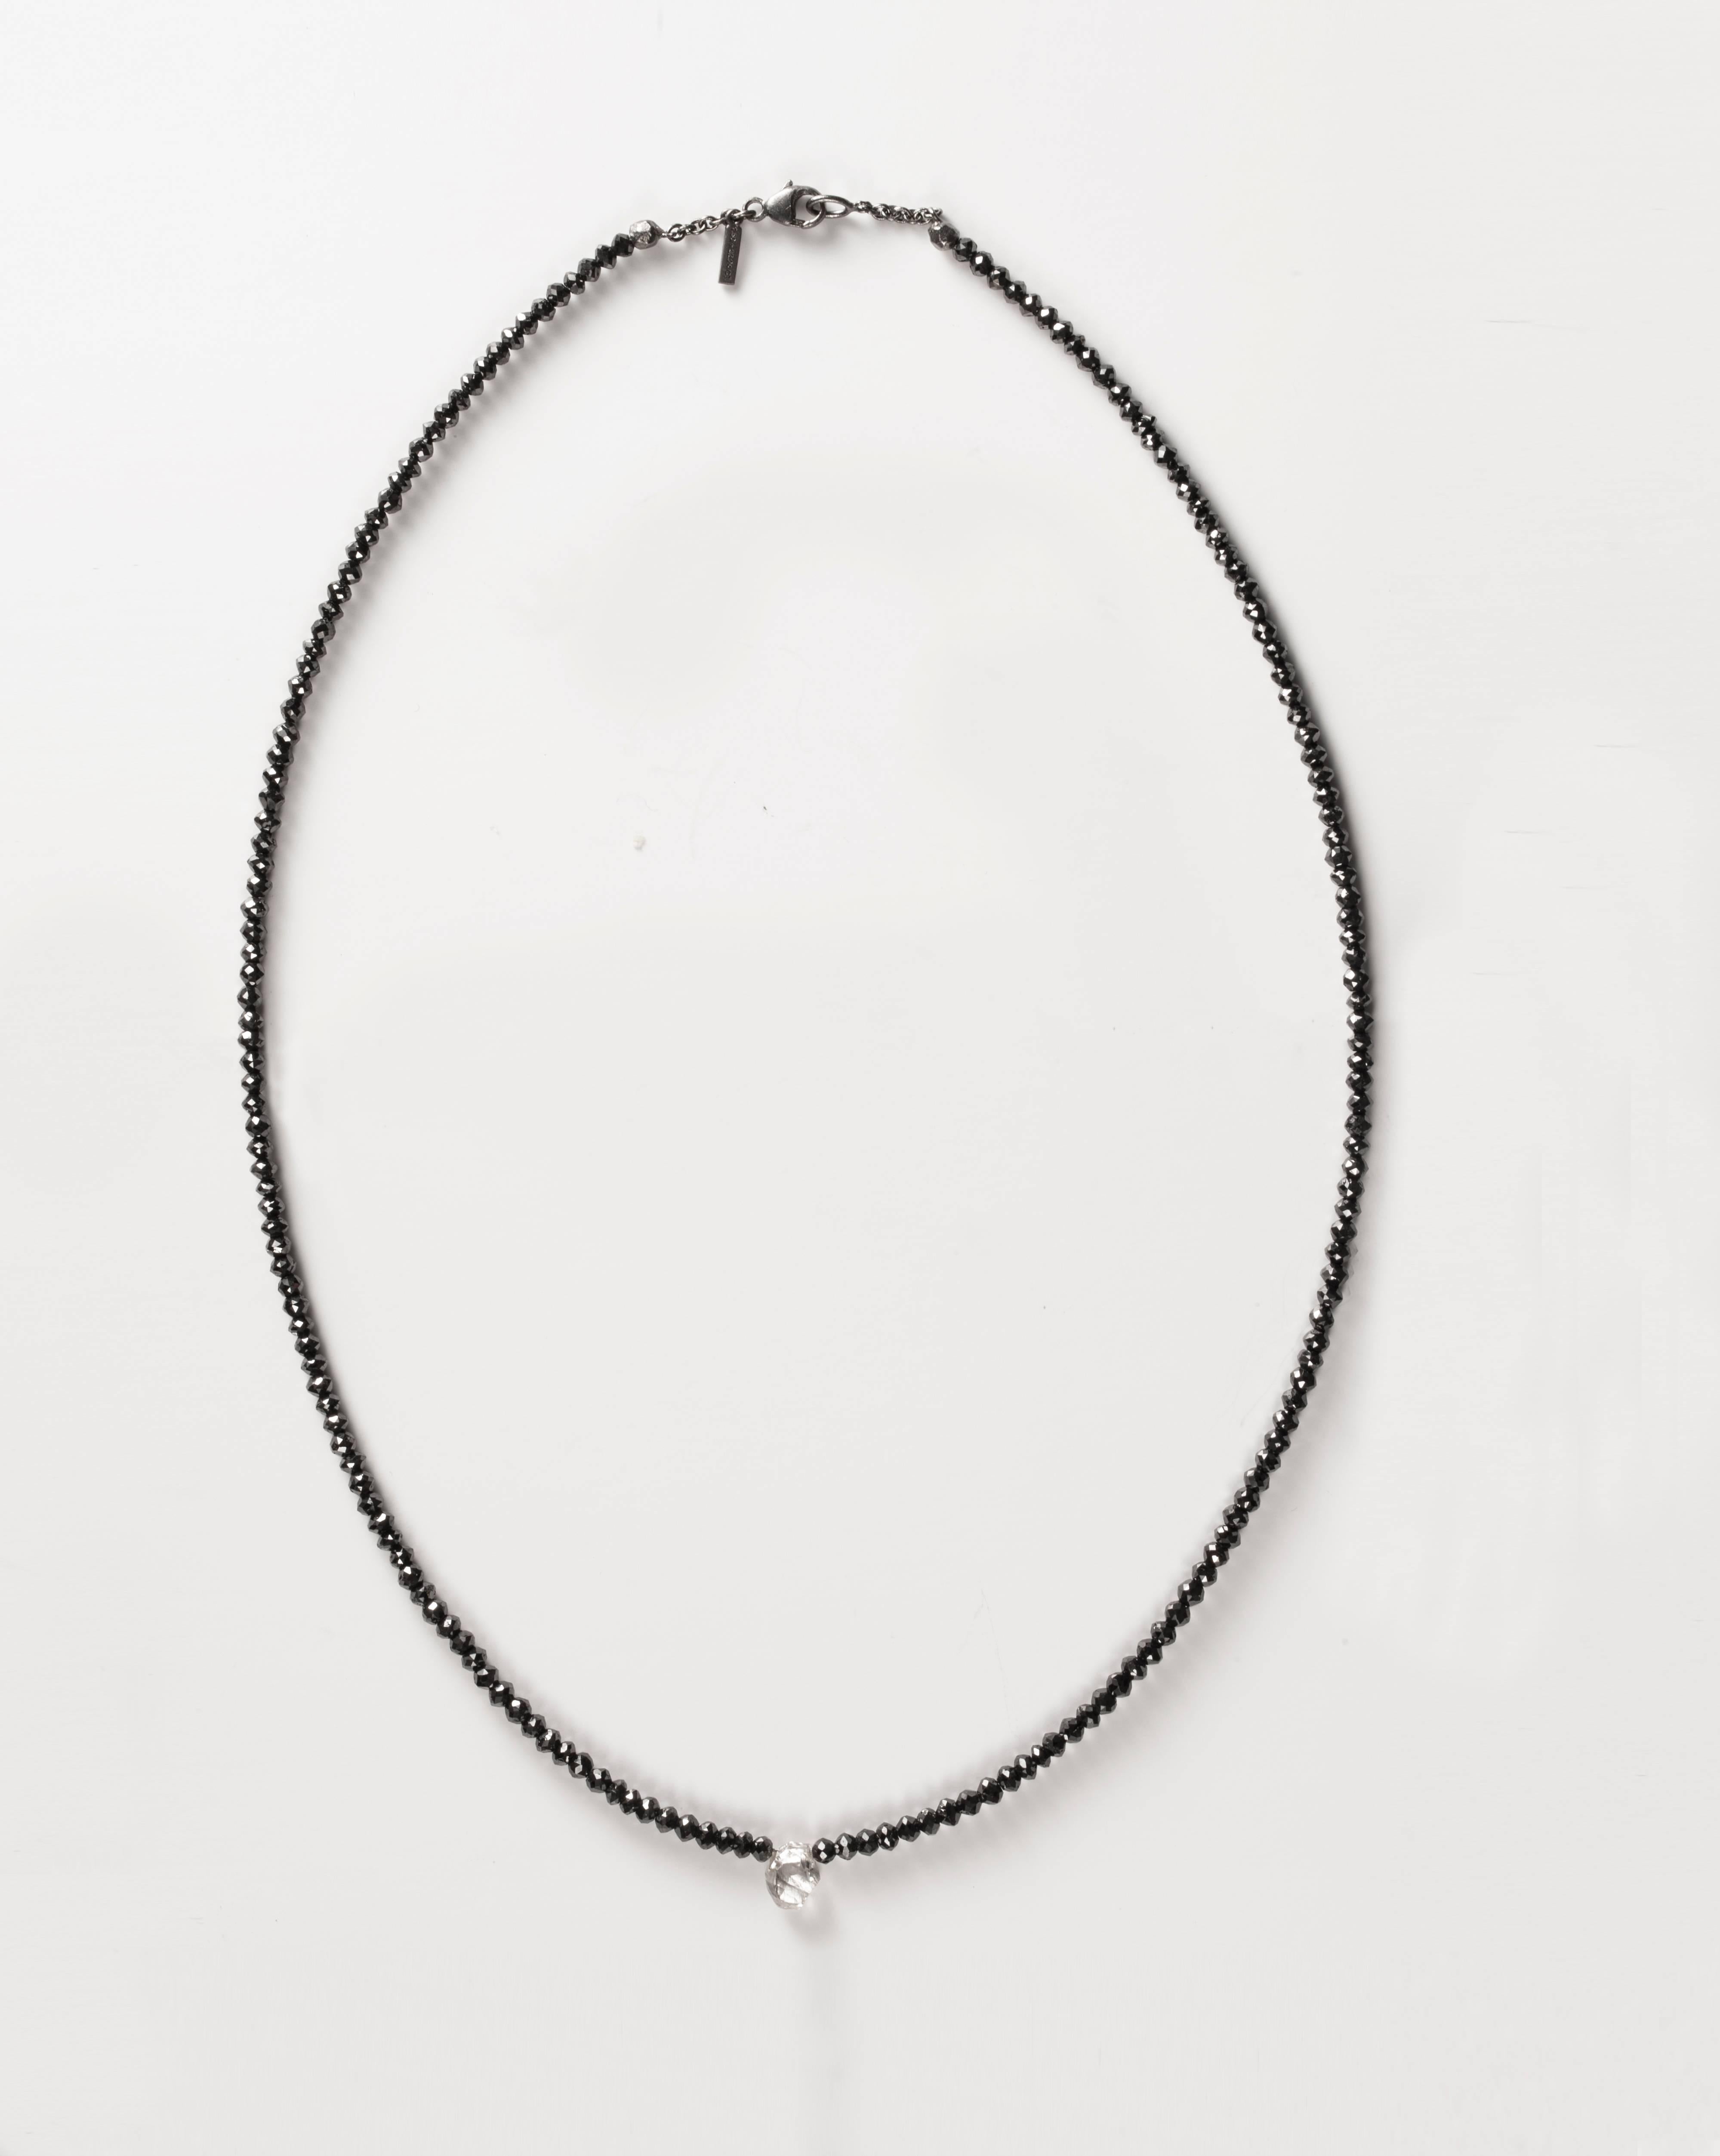 1.50 ct. Natural Whitish Rough diamond & 32.24 ct. Black Facetted diamonds in handcrafted collier.

Every rough diamond from Roughdiamonds dk has been personally handpicked by Maya Bjørnsten right before it would have been cut into “regular”